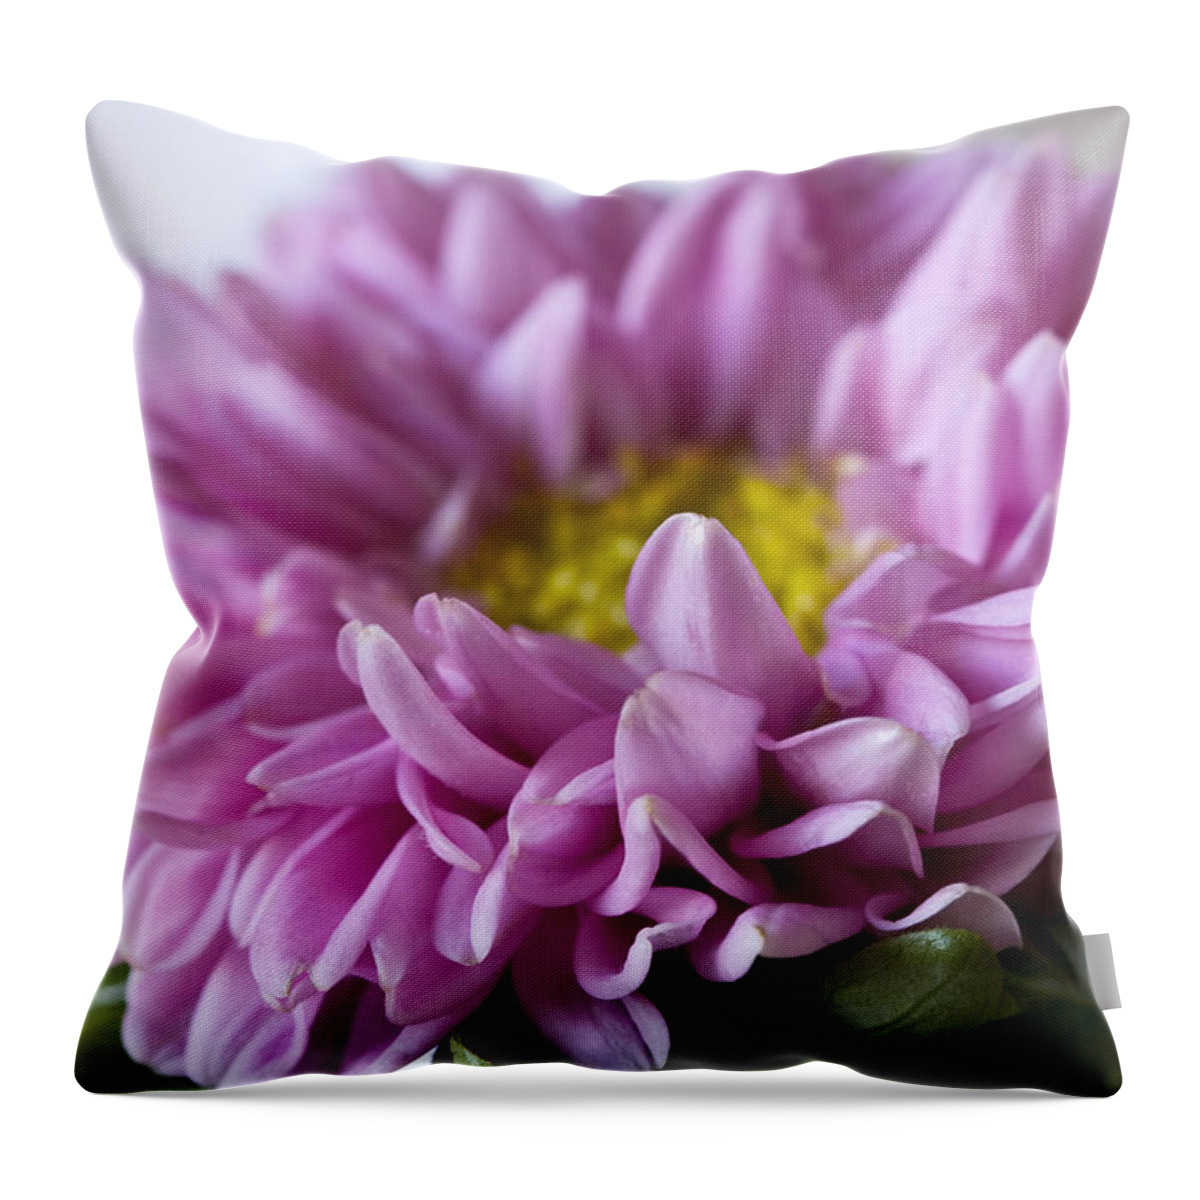 Pink Flowers Throw Pillow featuring the photograph Pink Mum by Cheryl Day